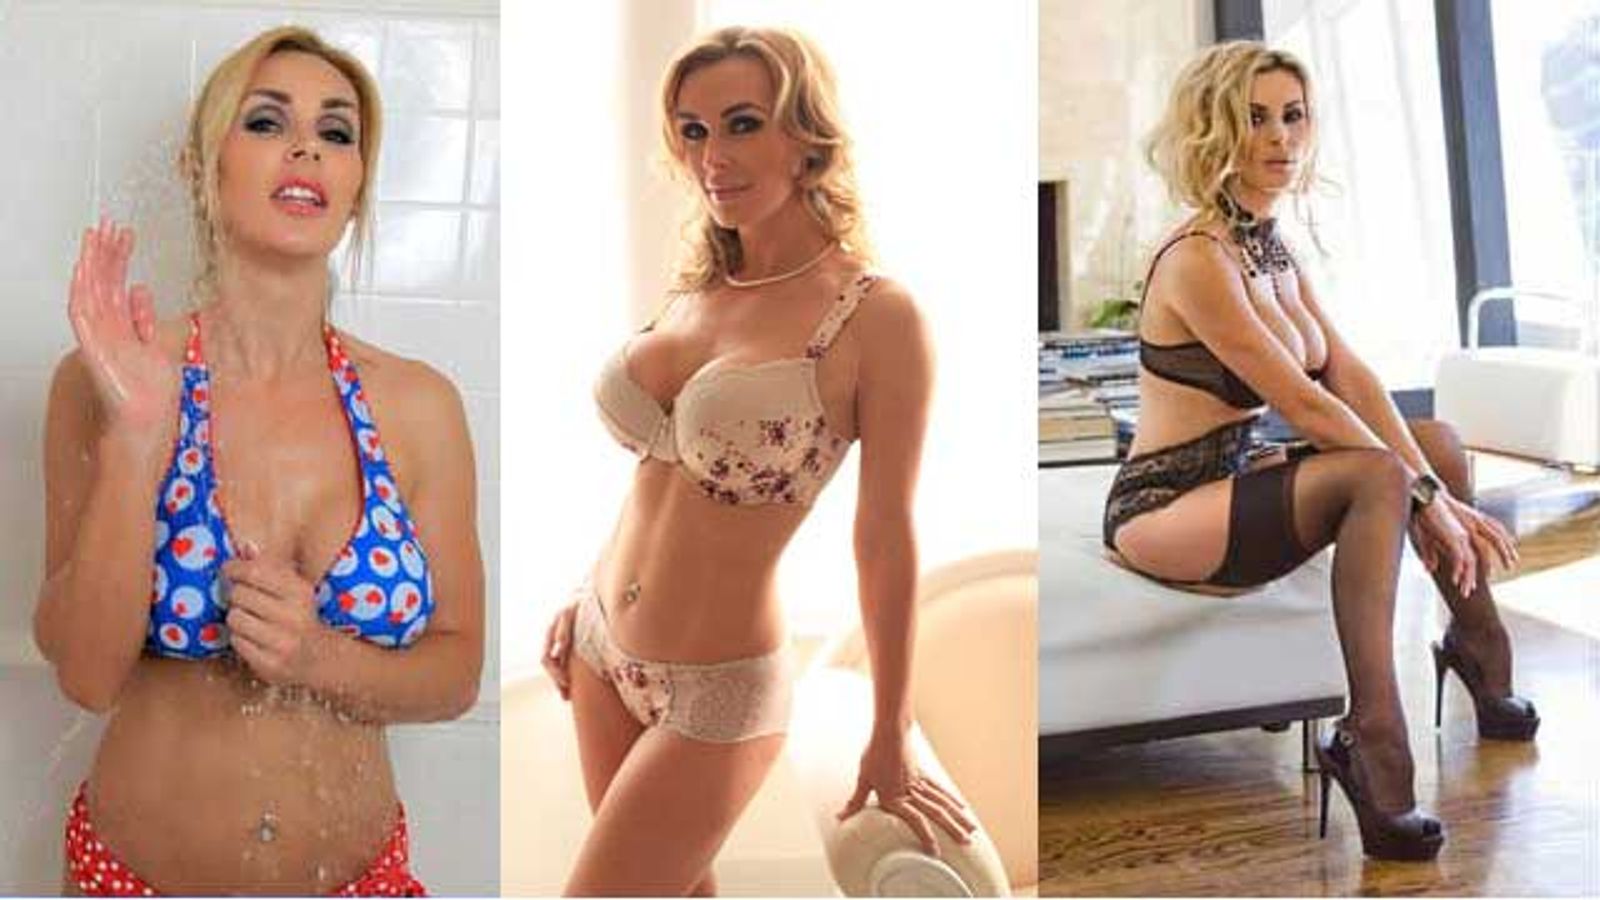 Tanya Tate To Guest Co-Host 'The Swing With Phil Varone'